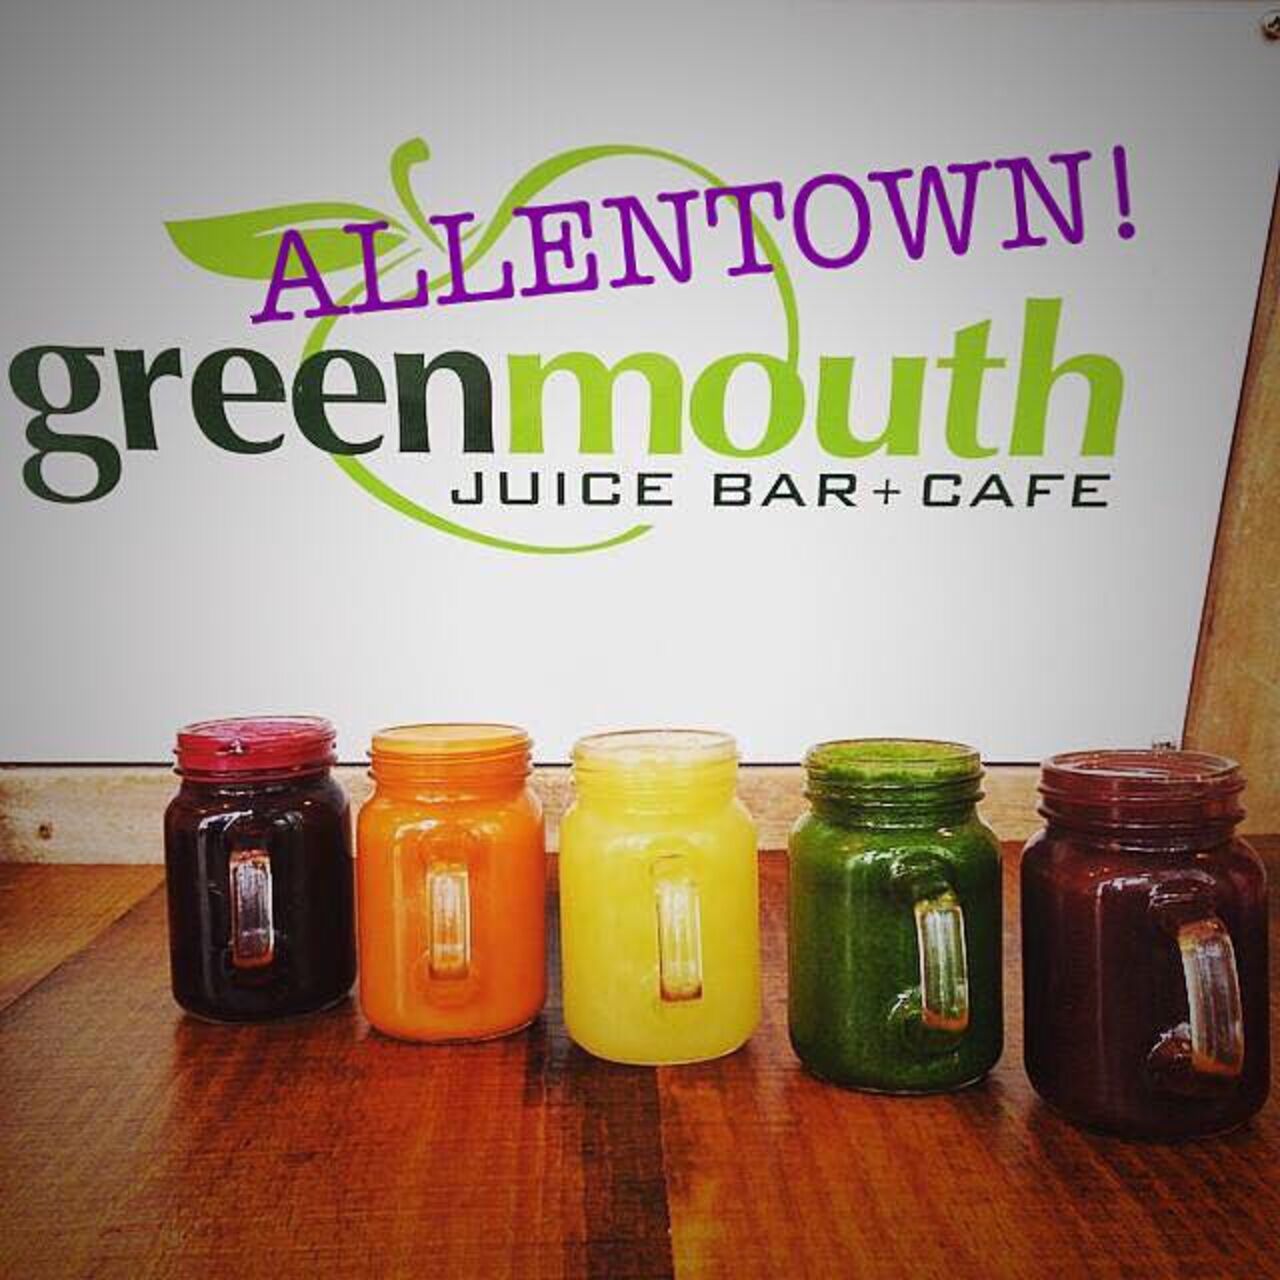 A photo of Greenmouth Juice Bar & Cafe, Allentown